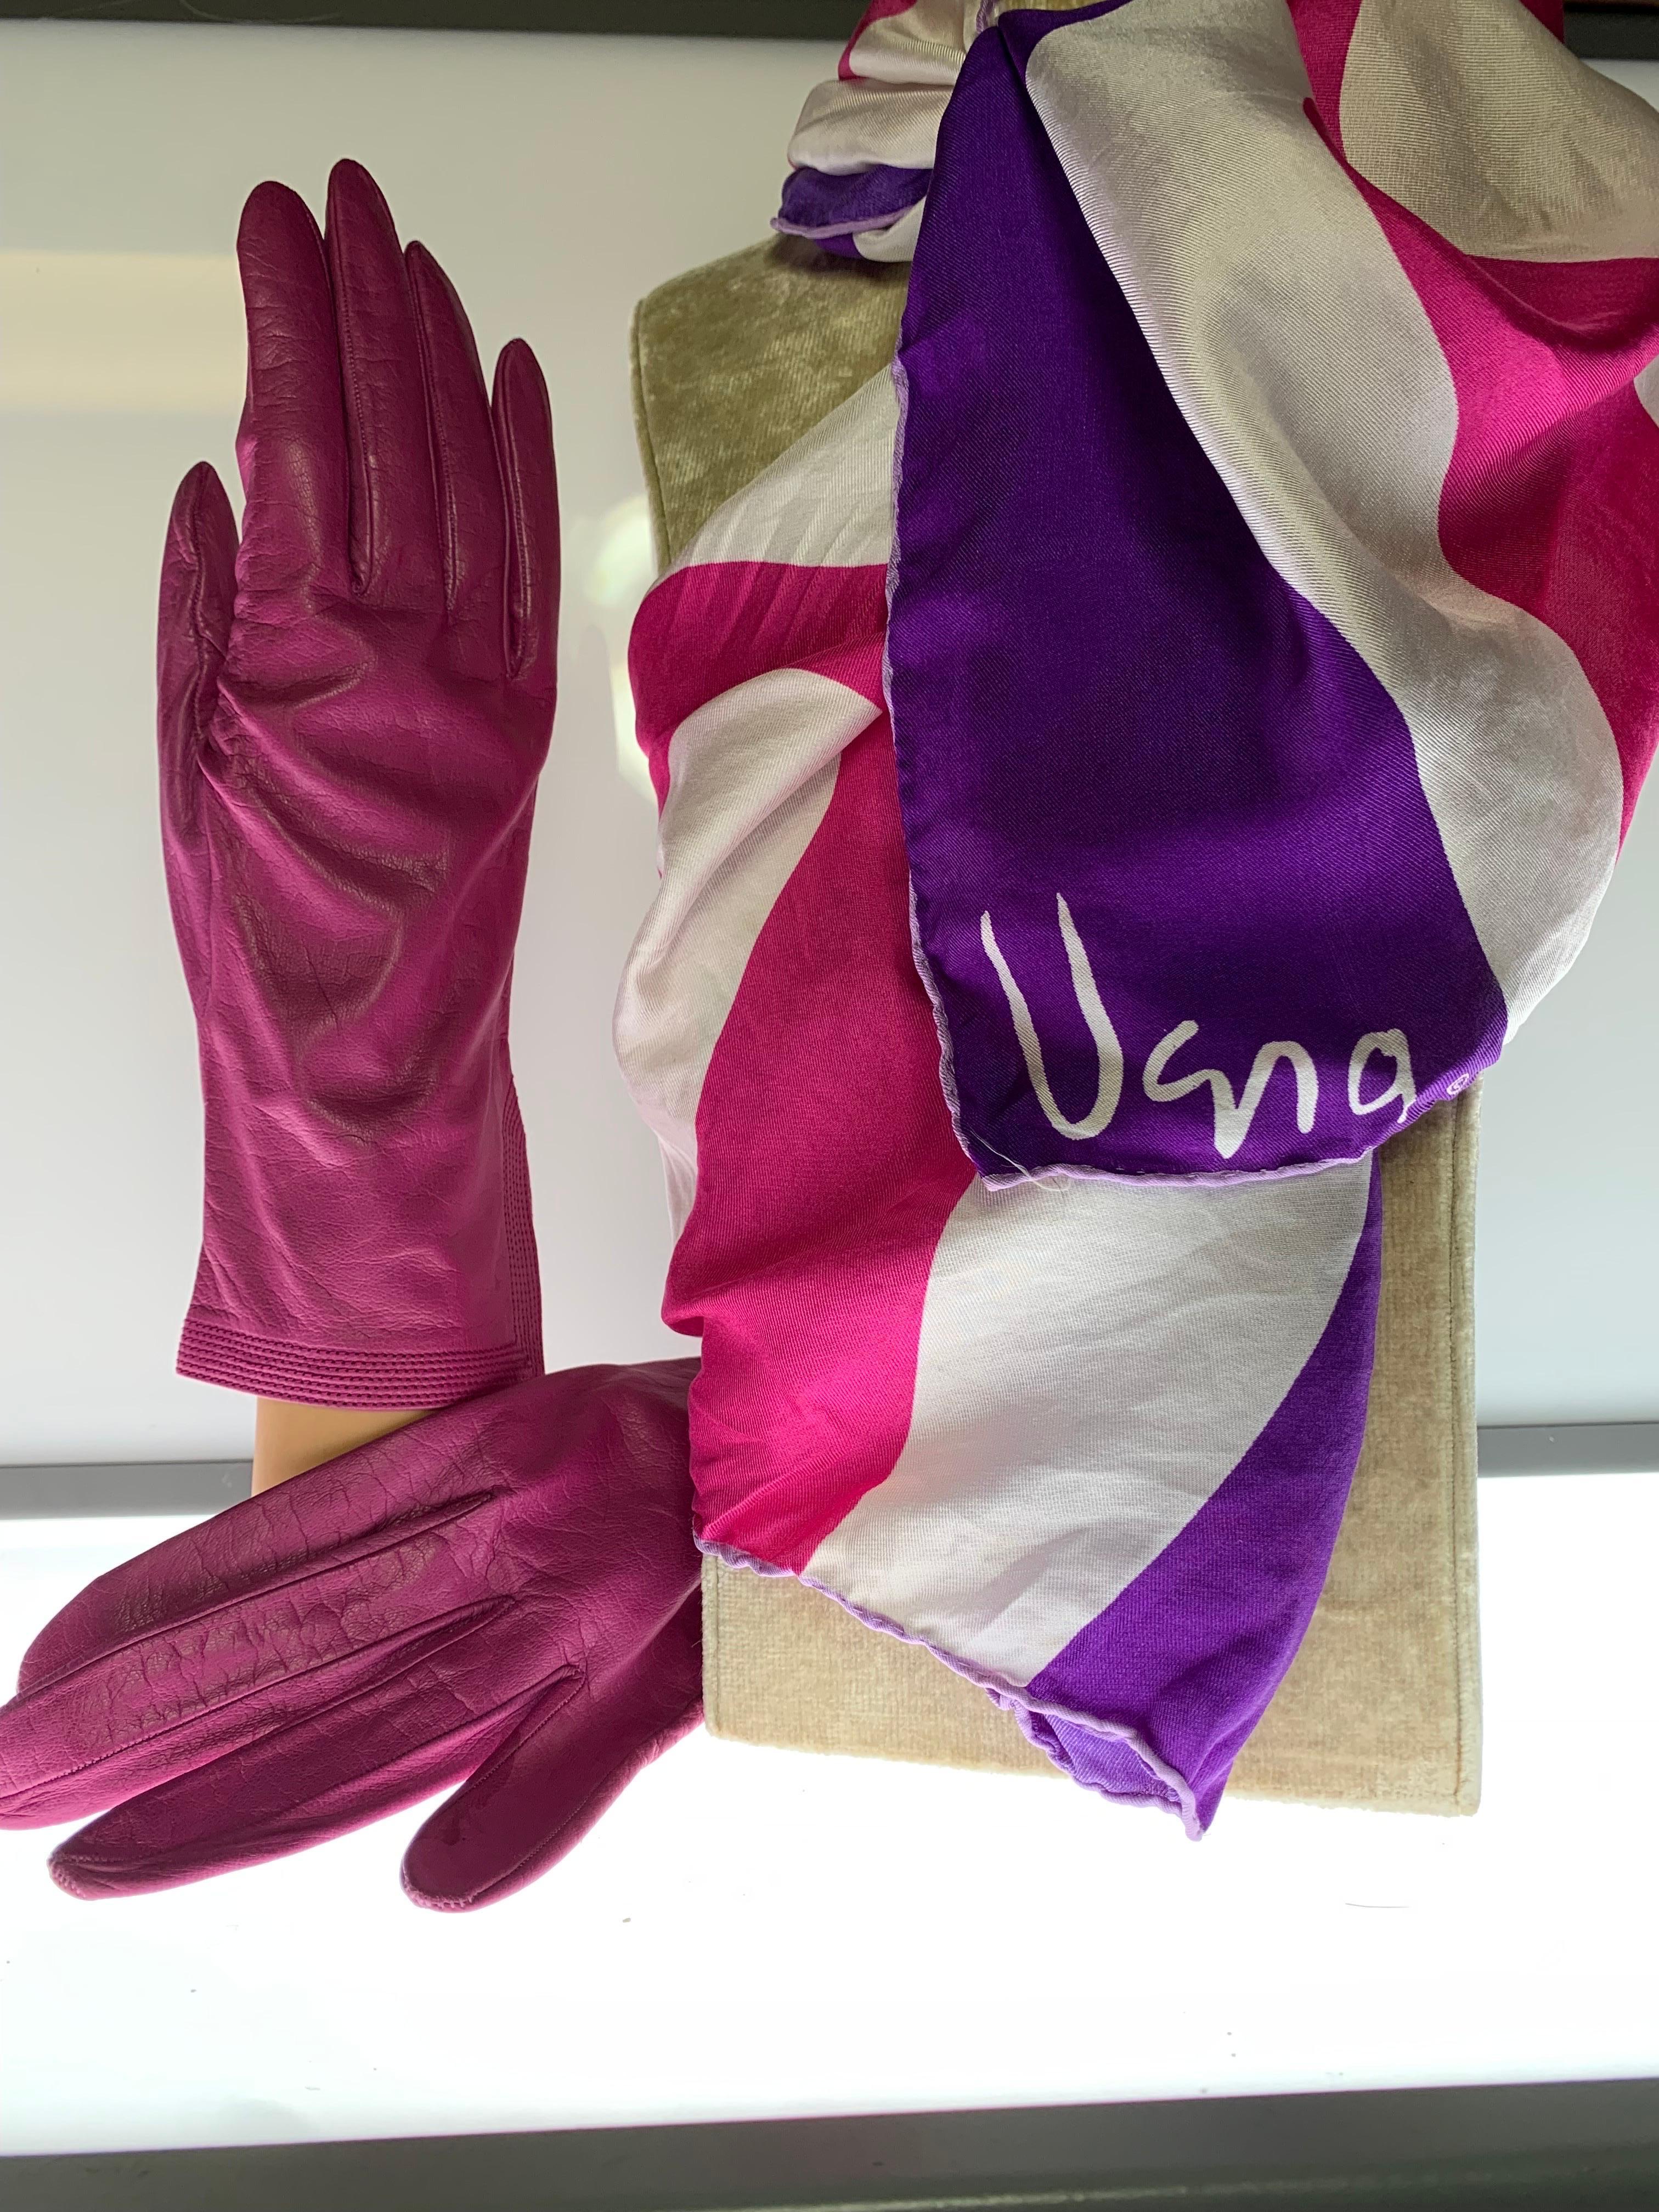 1980s Yves Saint Laurent Pink Kid Leather Gloves & Mod Coordinating Vera Scarf Set:  Gloves have a lovely vented and repeat trapunto stitched detail at side and are lined in silk. New, never worn. Included with a coordinating oblong shape mod print